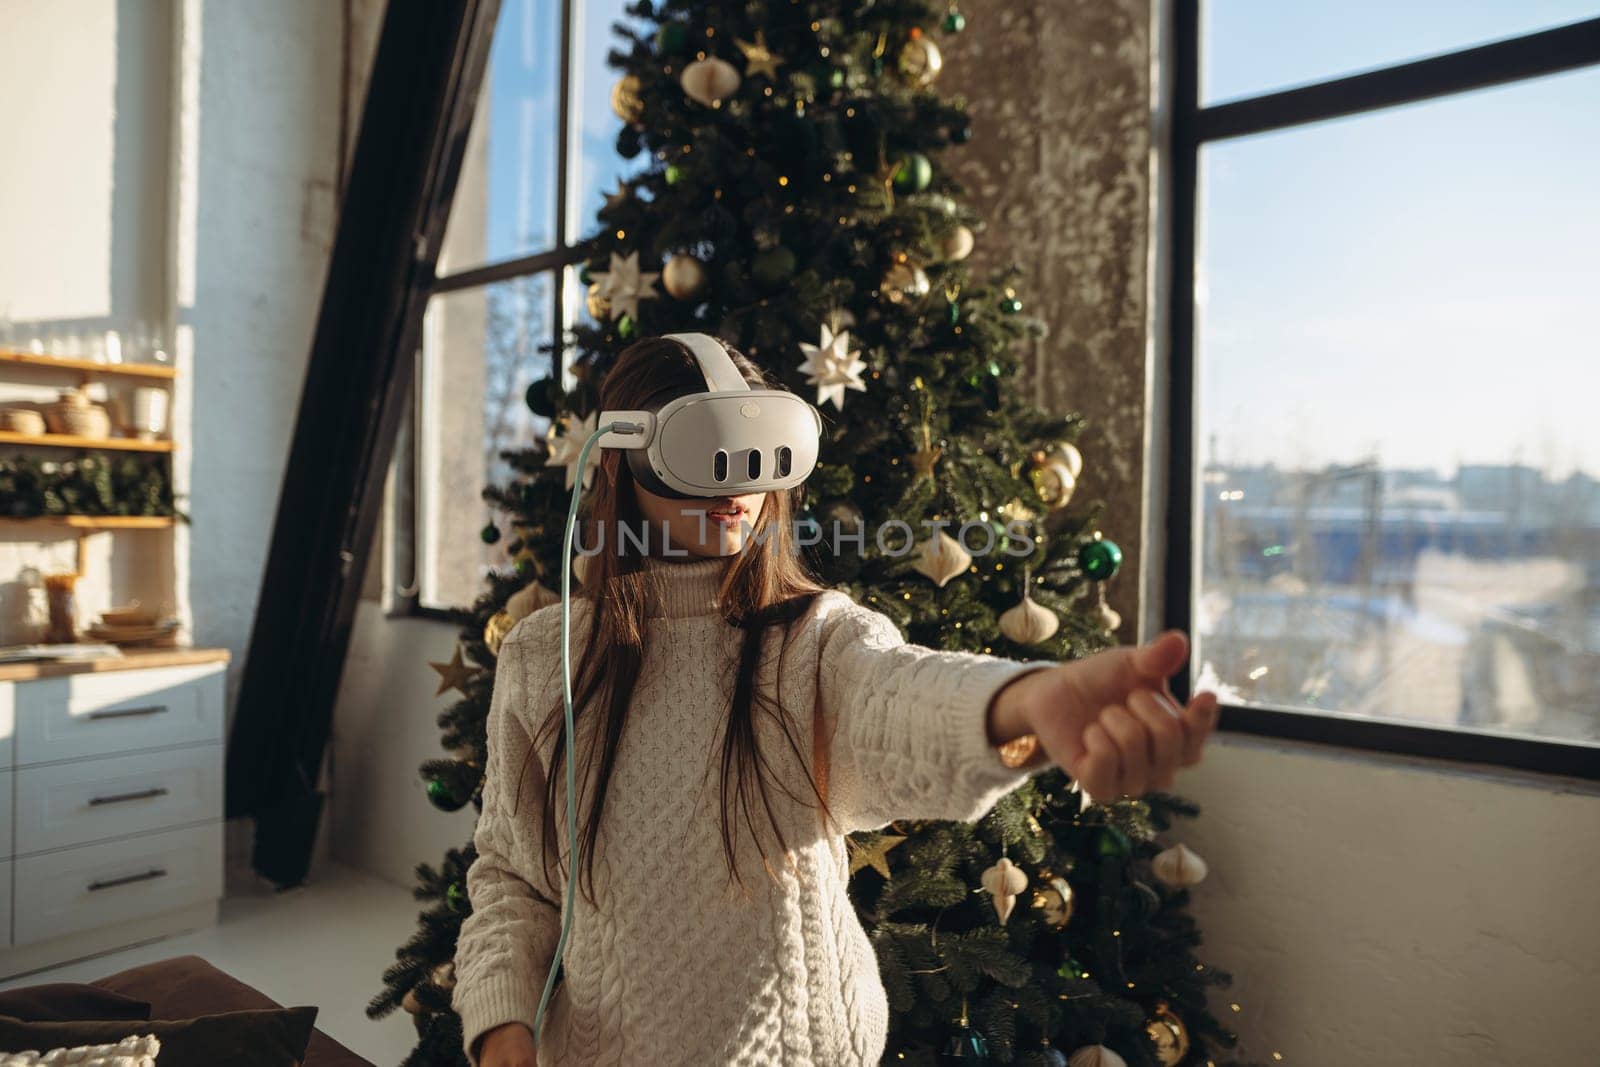 The portrait features a beautiful girl immersed in virtual reality, set against a Christmas tree. High quality photo